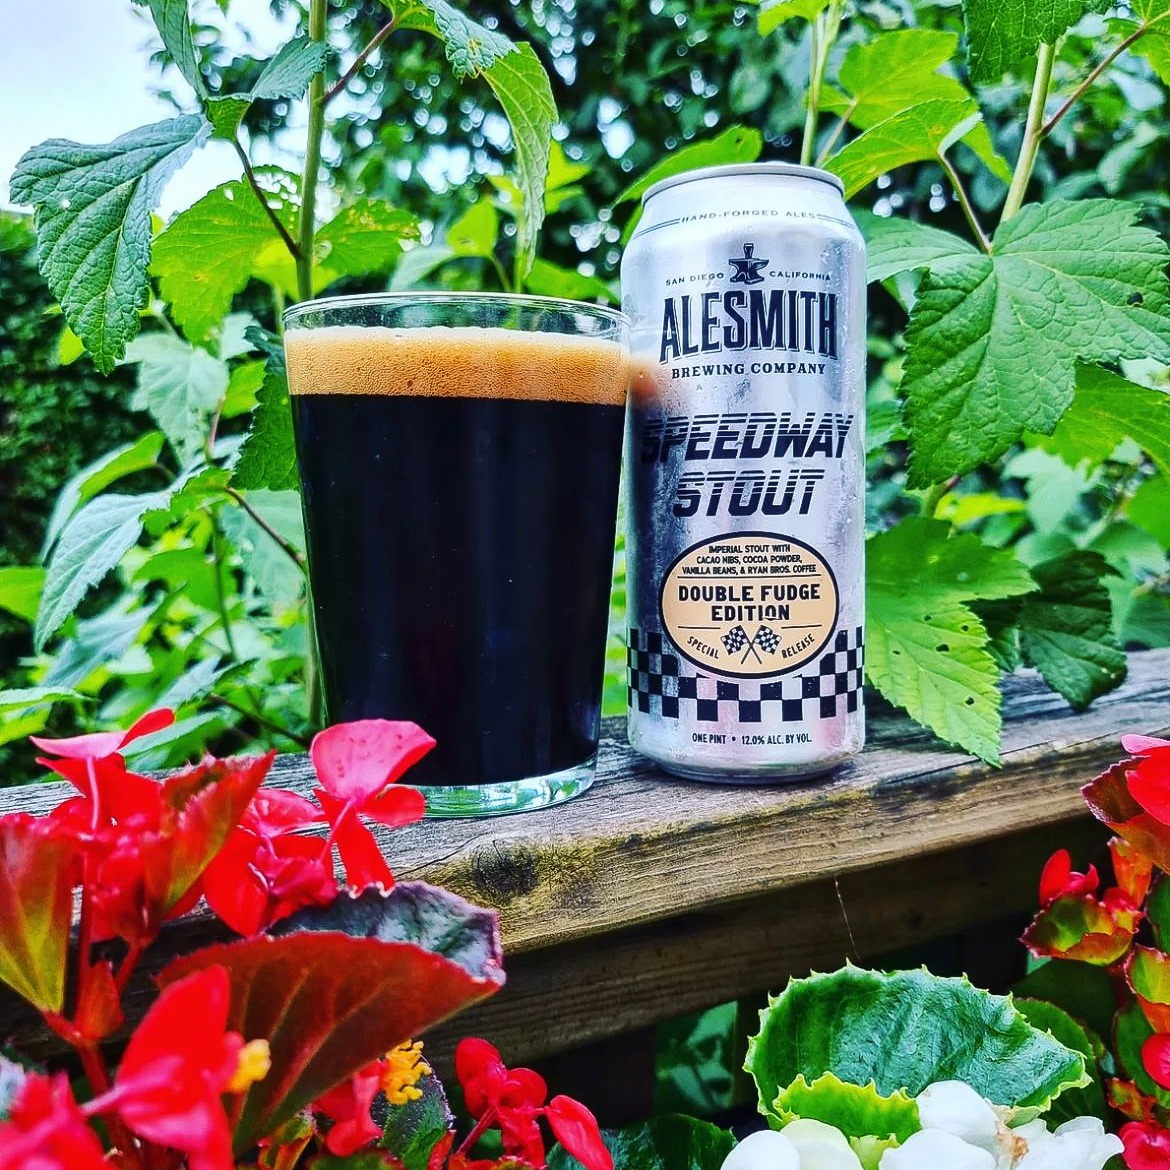 Speedway Stout, brewed by Alesmith, is undoubtedly one of the most famous stouts of all time. It wasn’t long ago when this stout was one of the most sought-after beers in the world. Six variants of Speedway Stout still sit over 4.5 on Untappd. What’s your fav Speedway Stout?